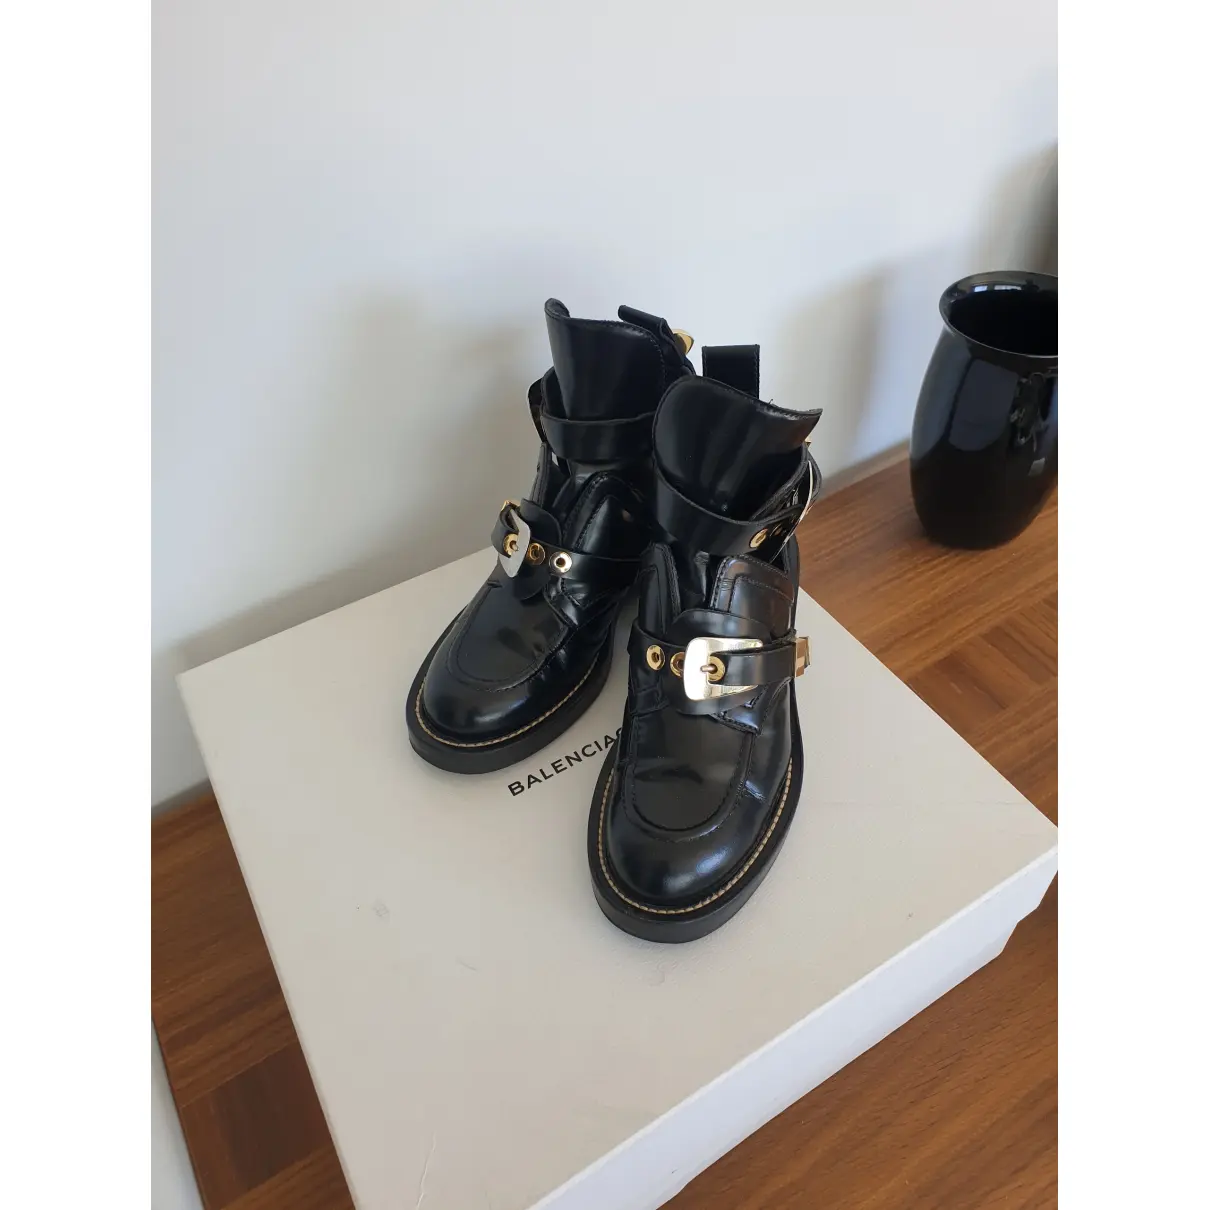 Buy Balenciaga Ceinture leather buckled boots online